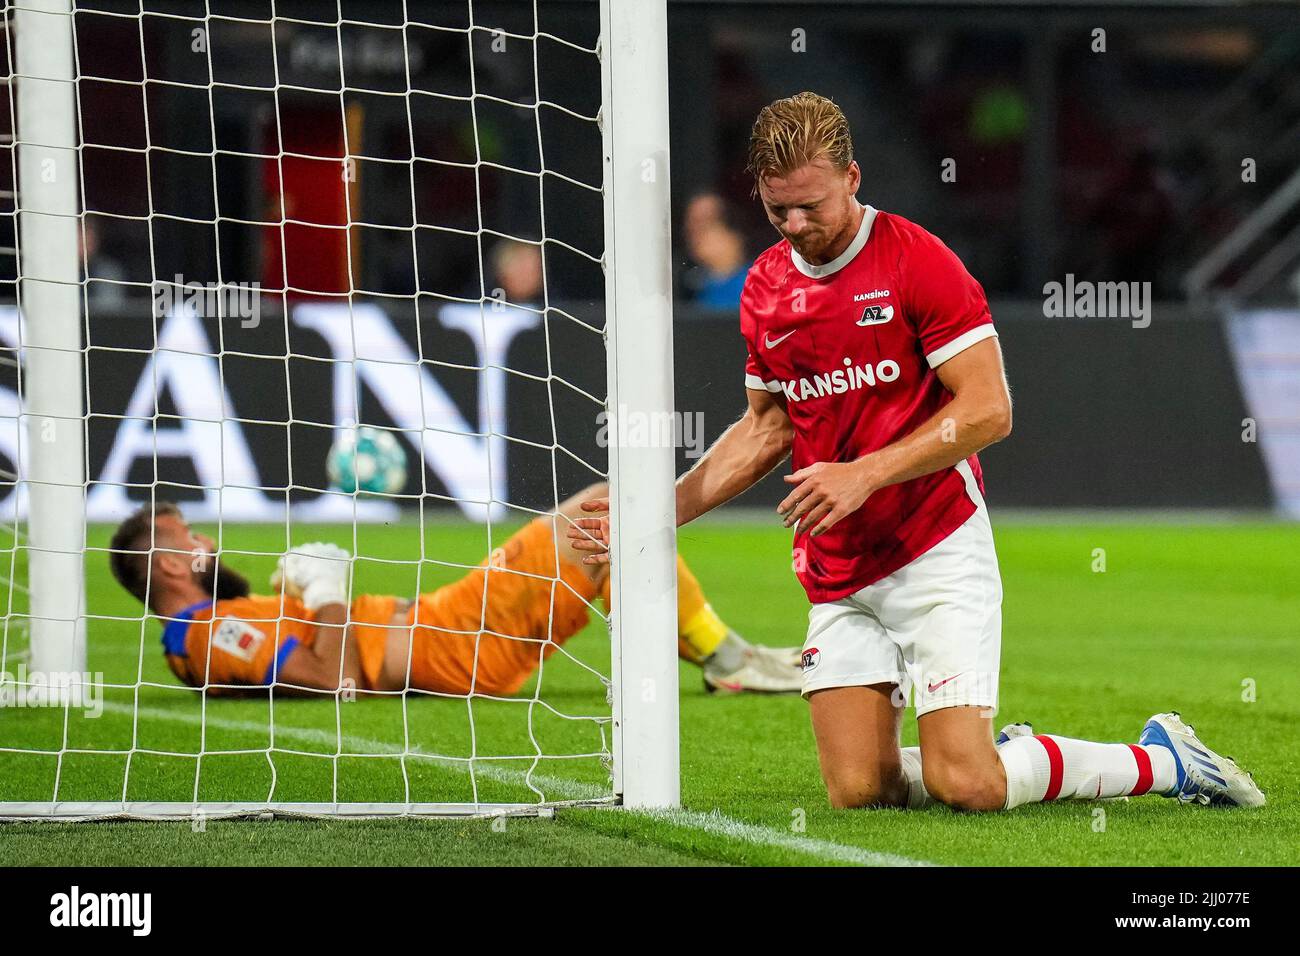 ALKMAAR - Dani de Wit of AZ Alkmaar is disappointed by a missed opportunity during the second heat of the Conference League match between AZ and FK Tuzla City at the AFAS stadium on July 21, 2022 in Alkmaar, the Netherlands. ANP ED OF THE POL Stock Photo